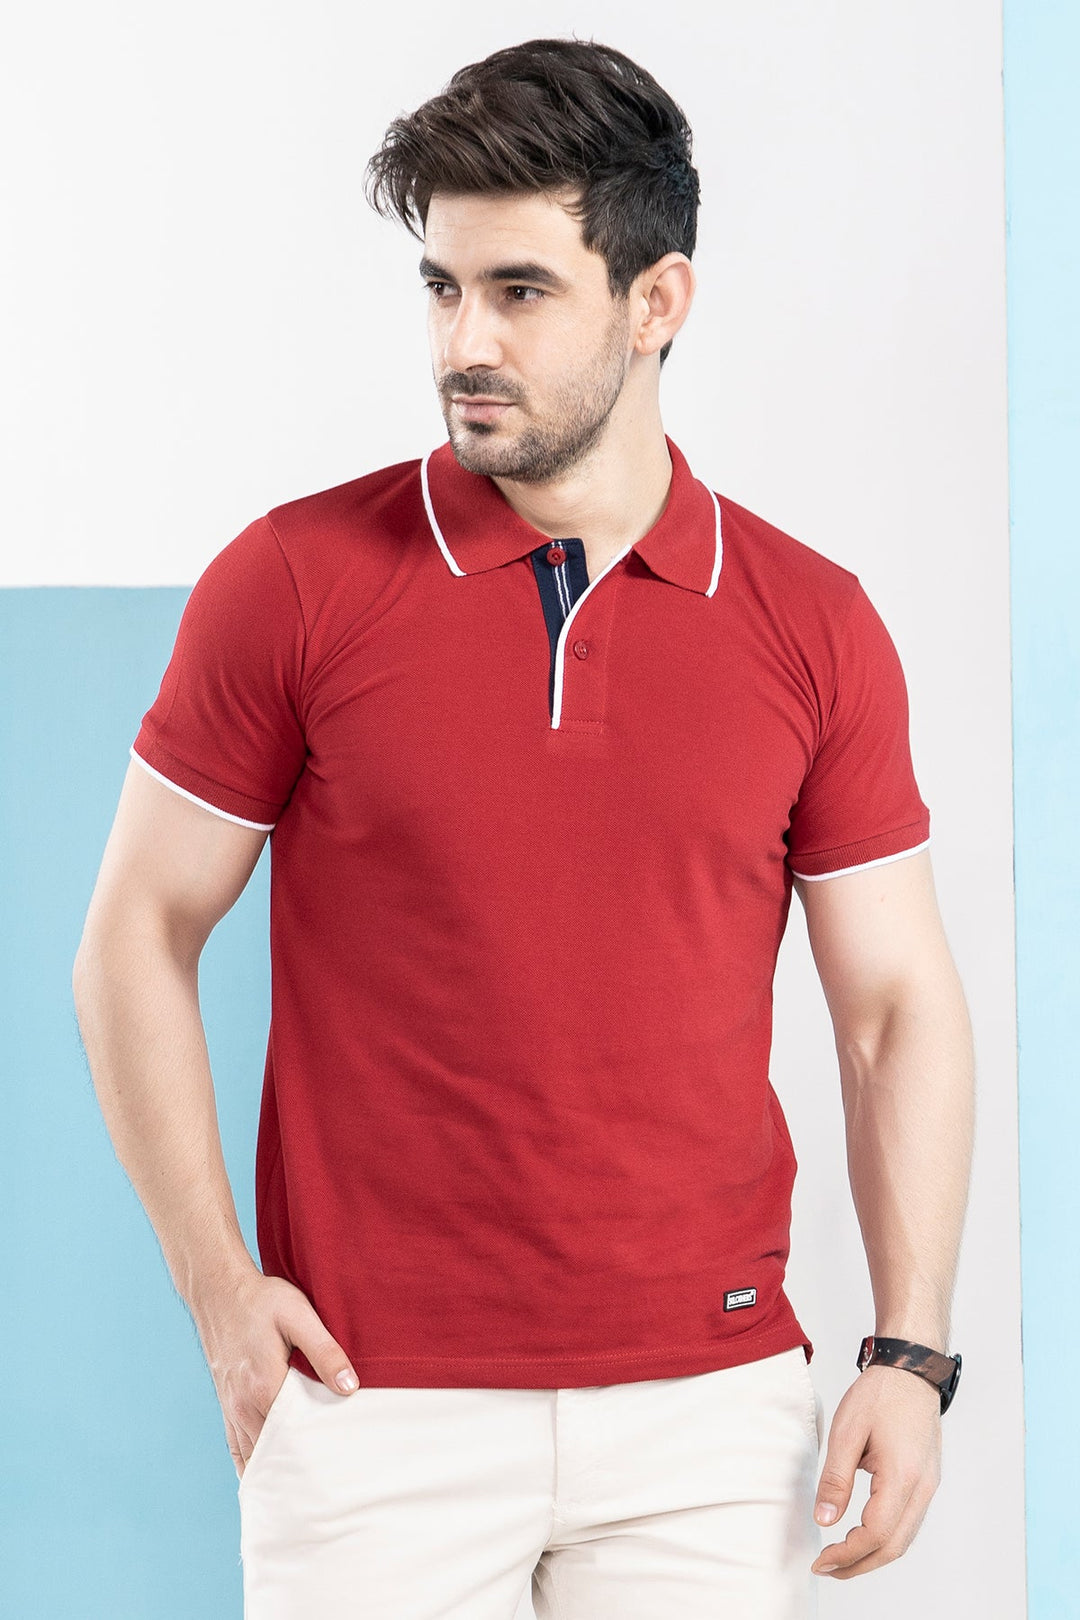 Contrast Placket Polo - S21 - MP0017R